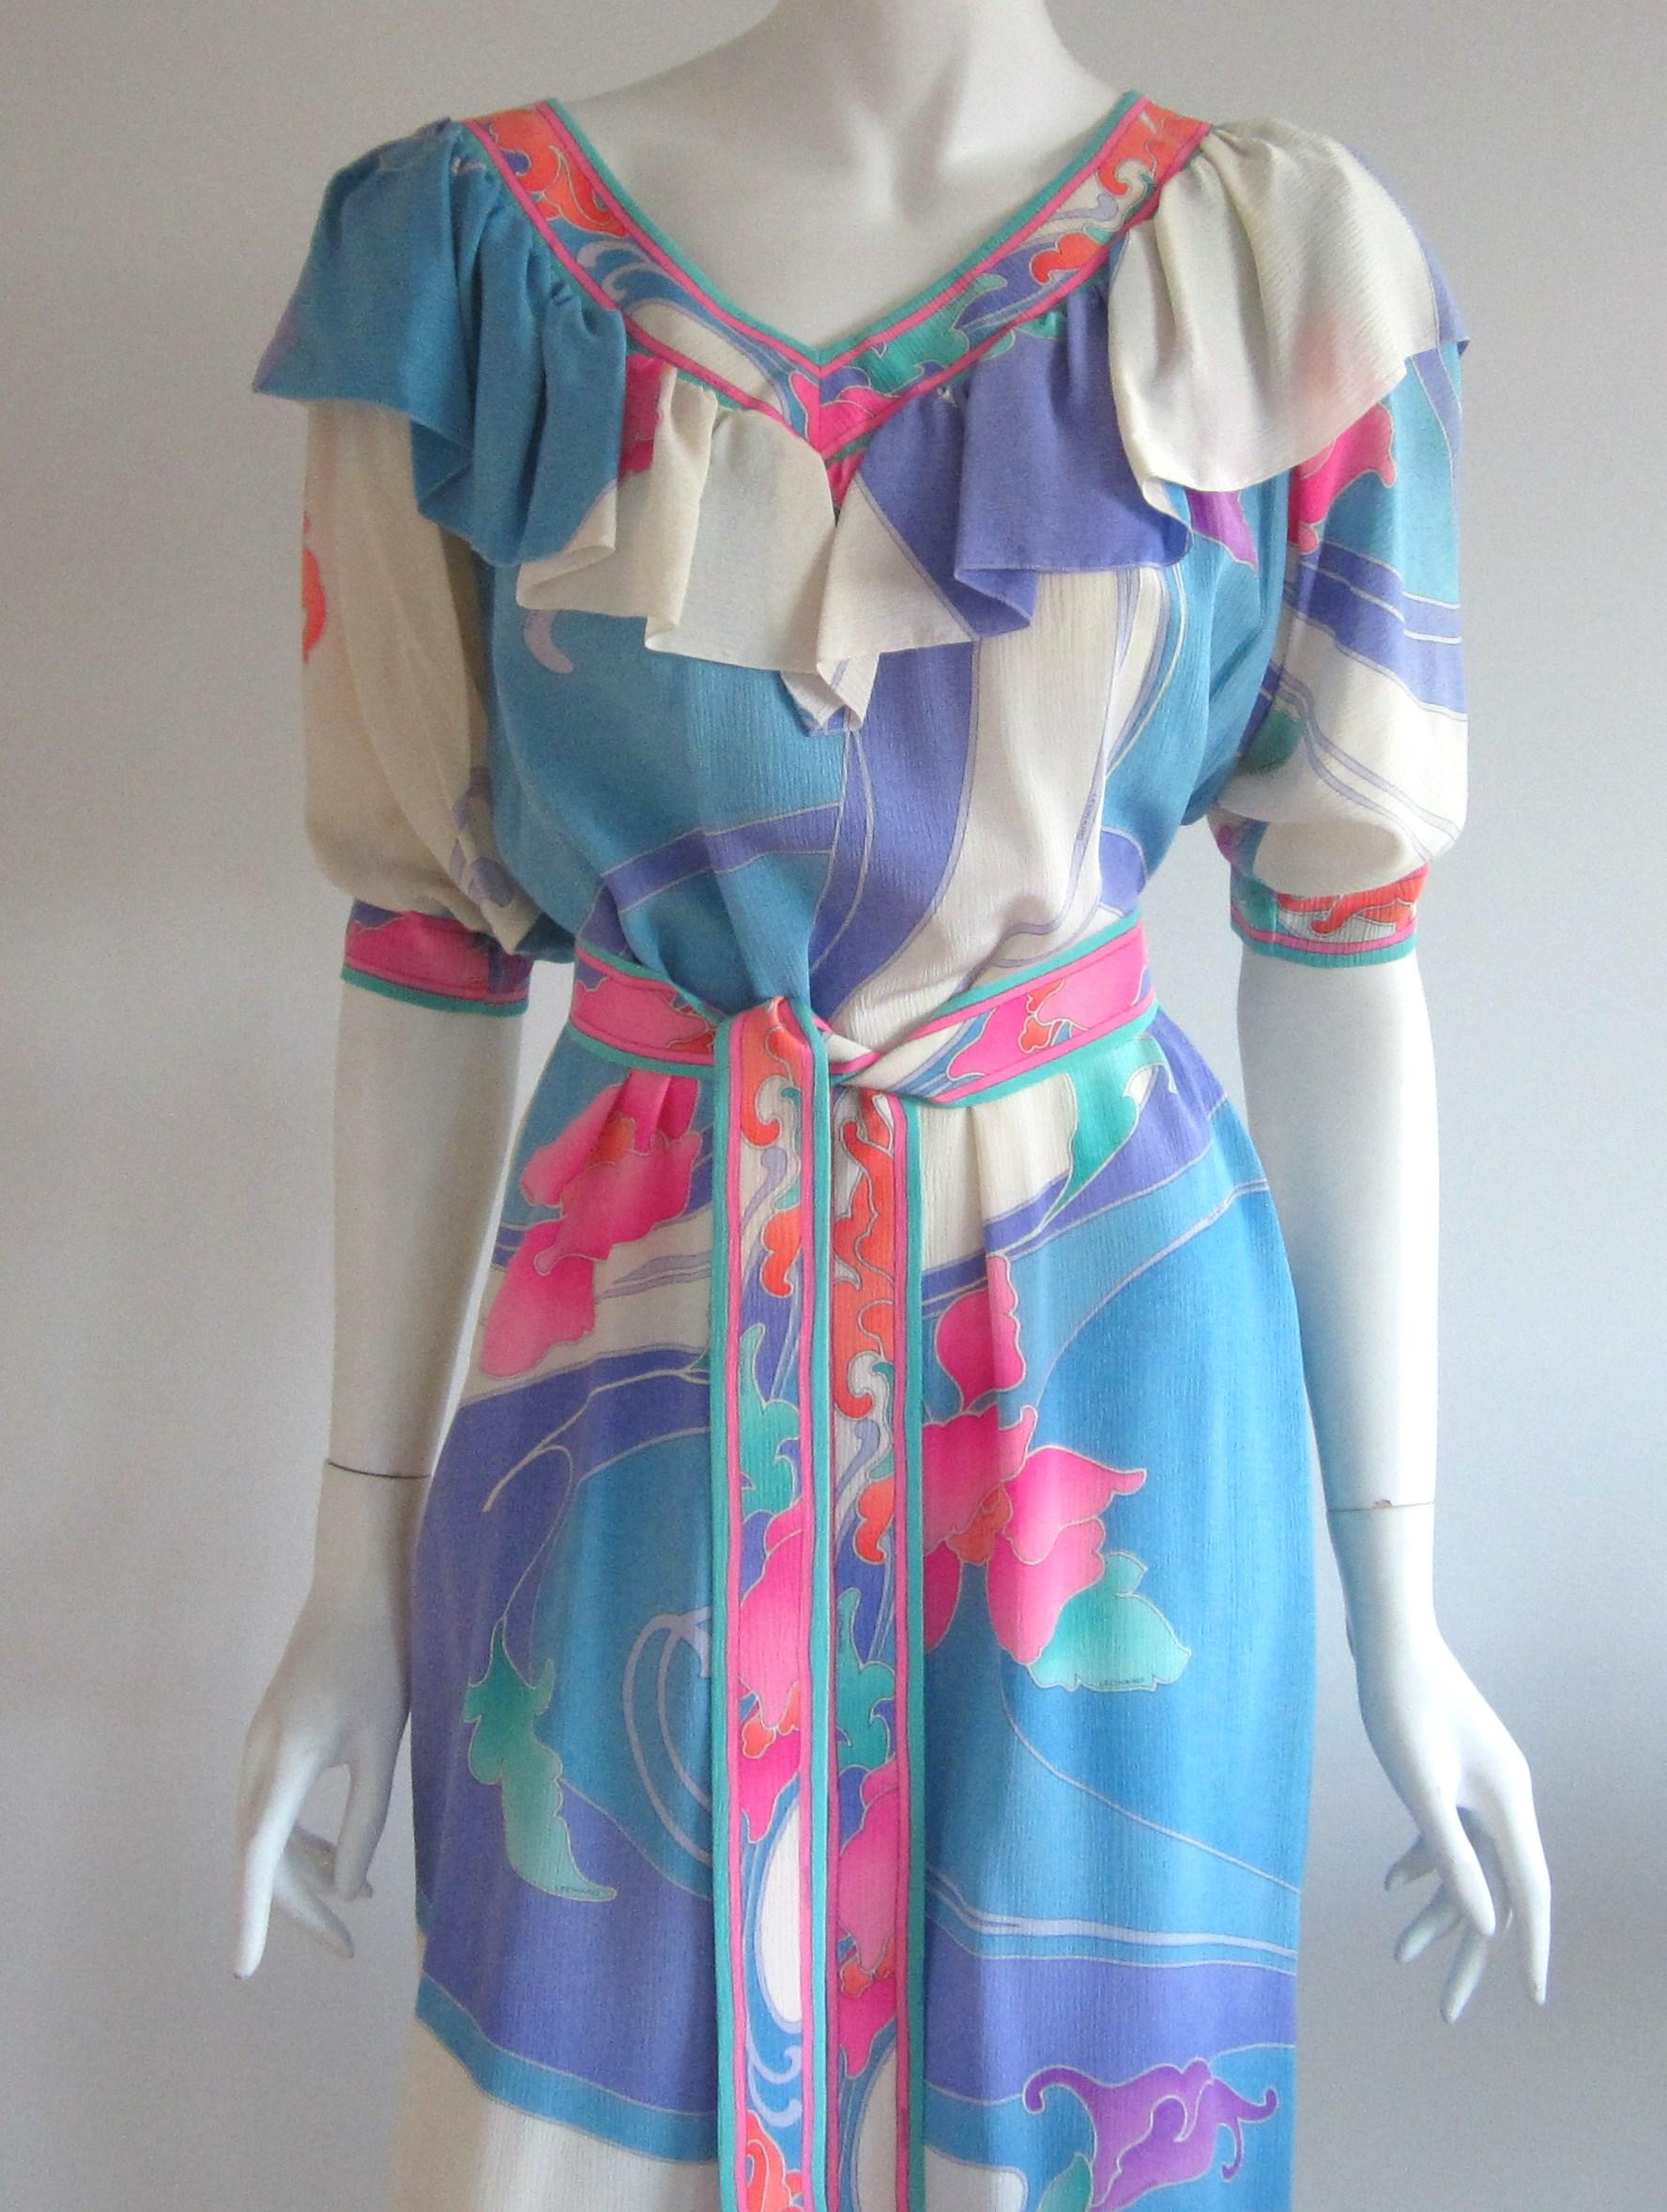 Leonard Paris Floral Print Shift  Dress Made in France 1980s. Matching scarf belt, wear as a belt or head band. Ruffled collar and pockets! Will fit a variety of sizes becasuse of it's cut. Measuring up to 40in. Chest -- Waist up to 40in. -- Hips up